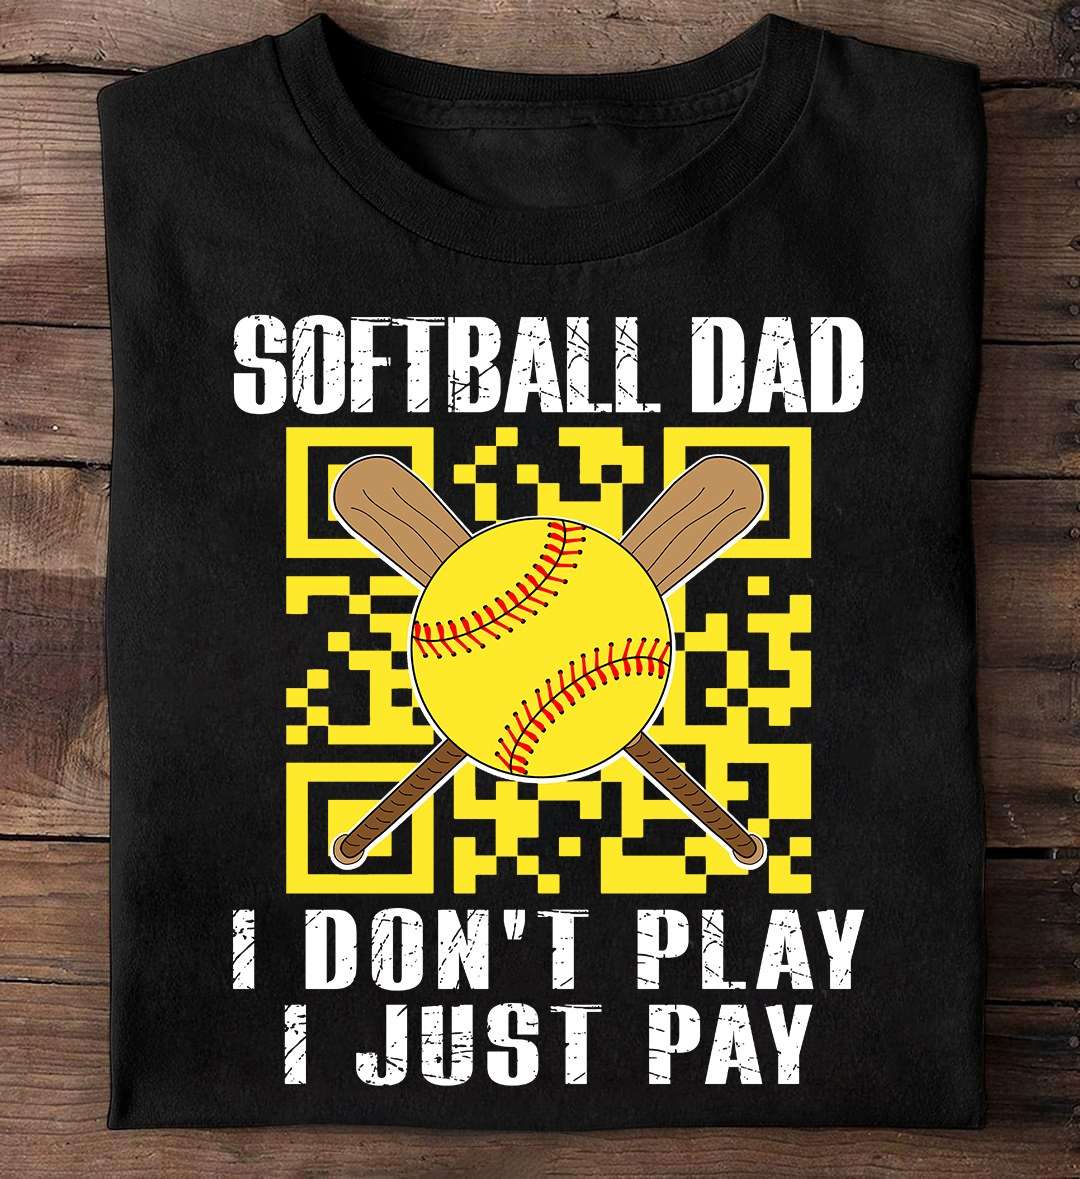 Softball dad I don't play I just pay - QR scan code, dad play softball